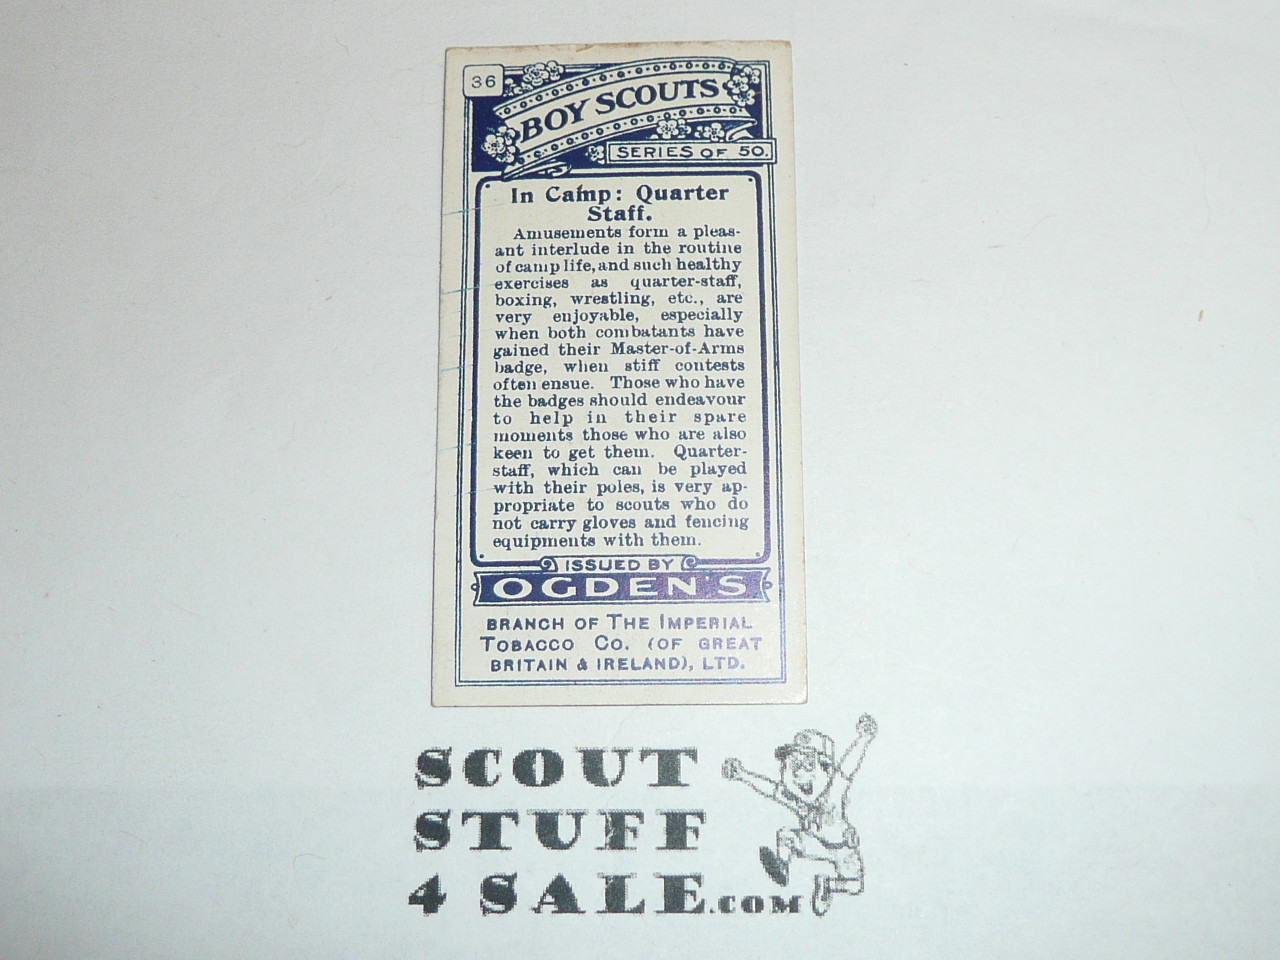 Ogden Tabacco Company Premium Card, First Boy Scout Series of 50 (Blue Backs), Card #36 In Camp: Quarter Staff, 1911